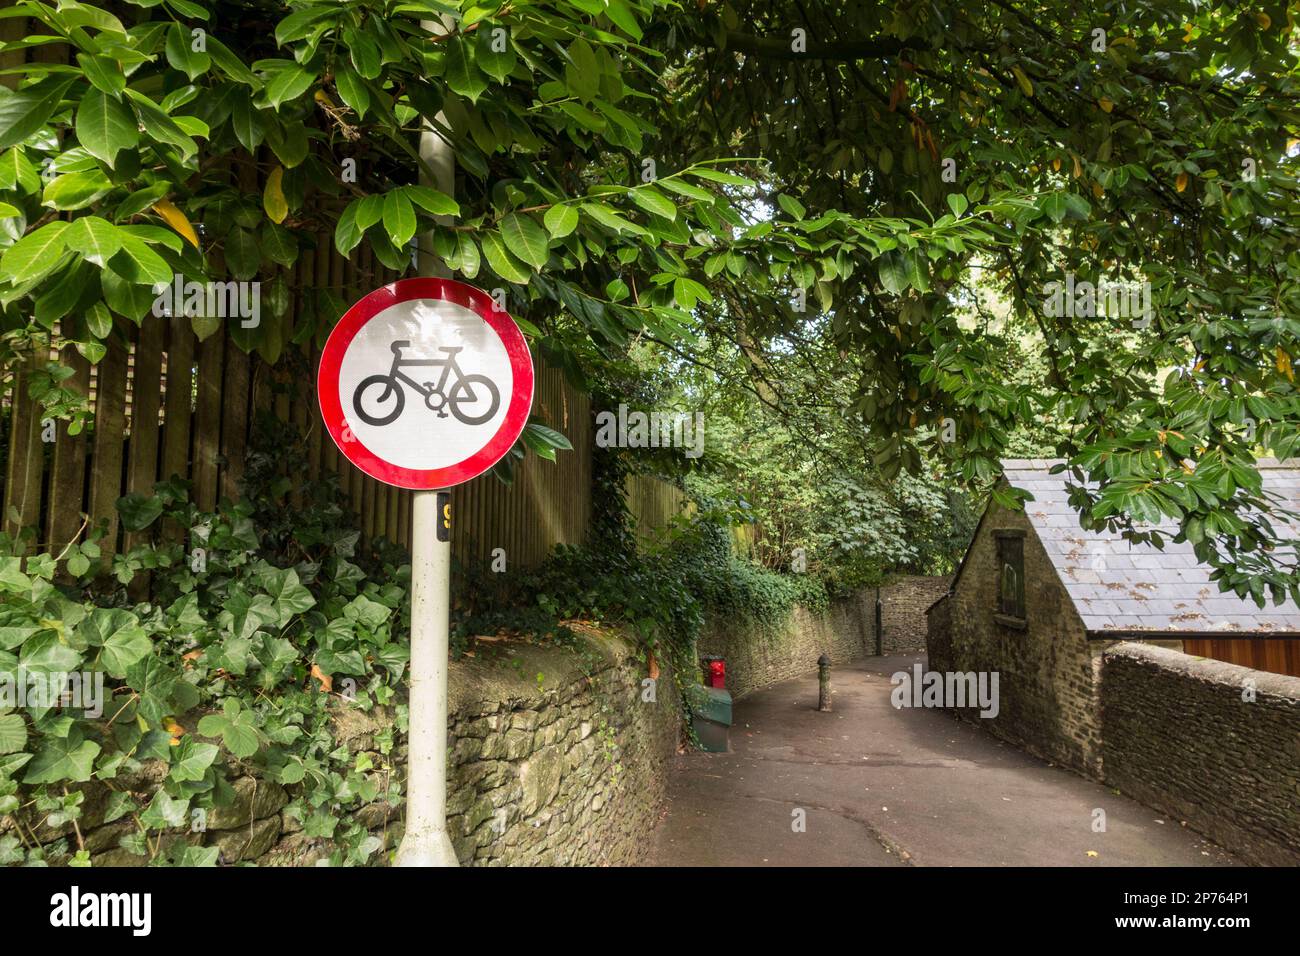 No bicycles allowed warning sign at alley, Tetbury, Gloucestershire, UK Stock Photo